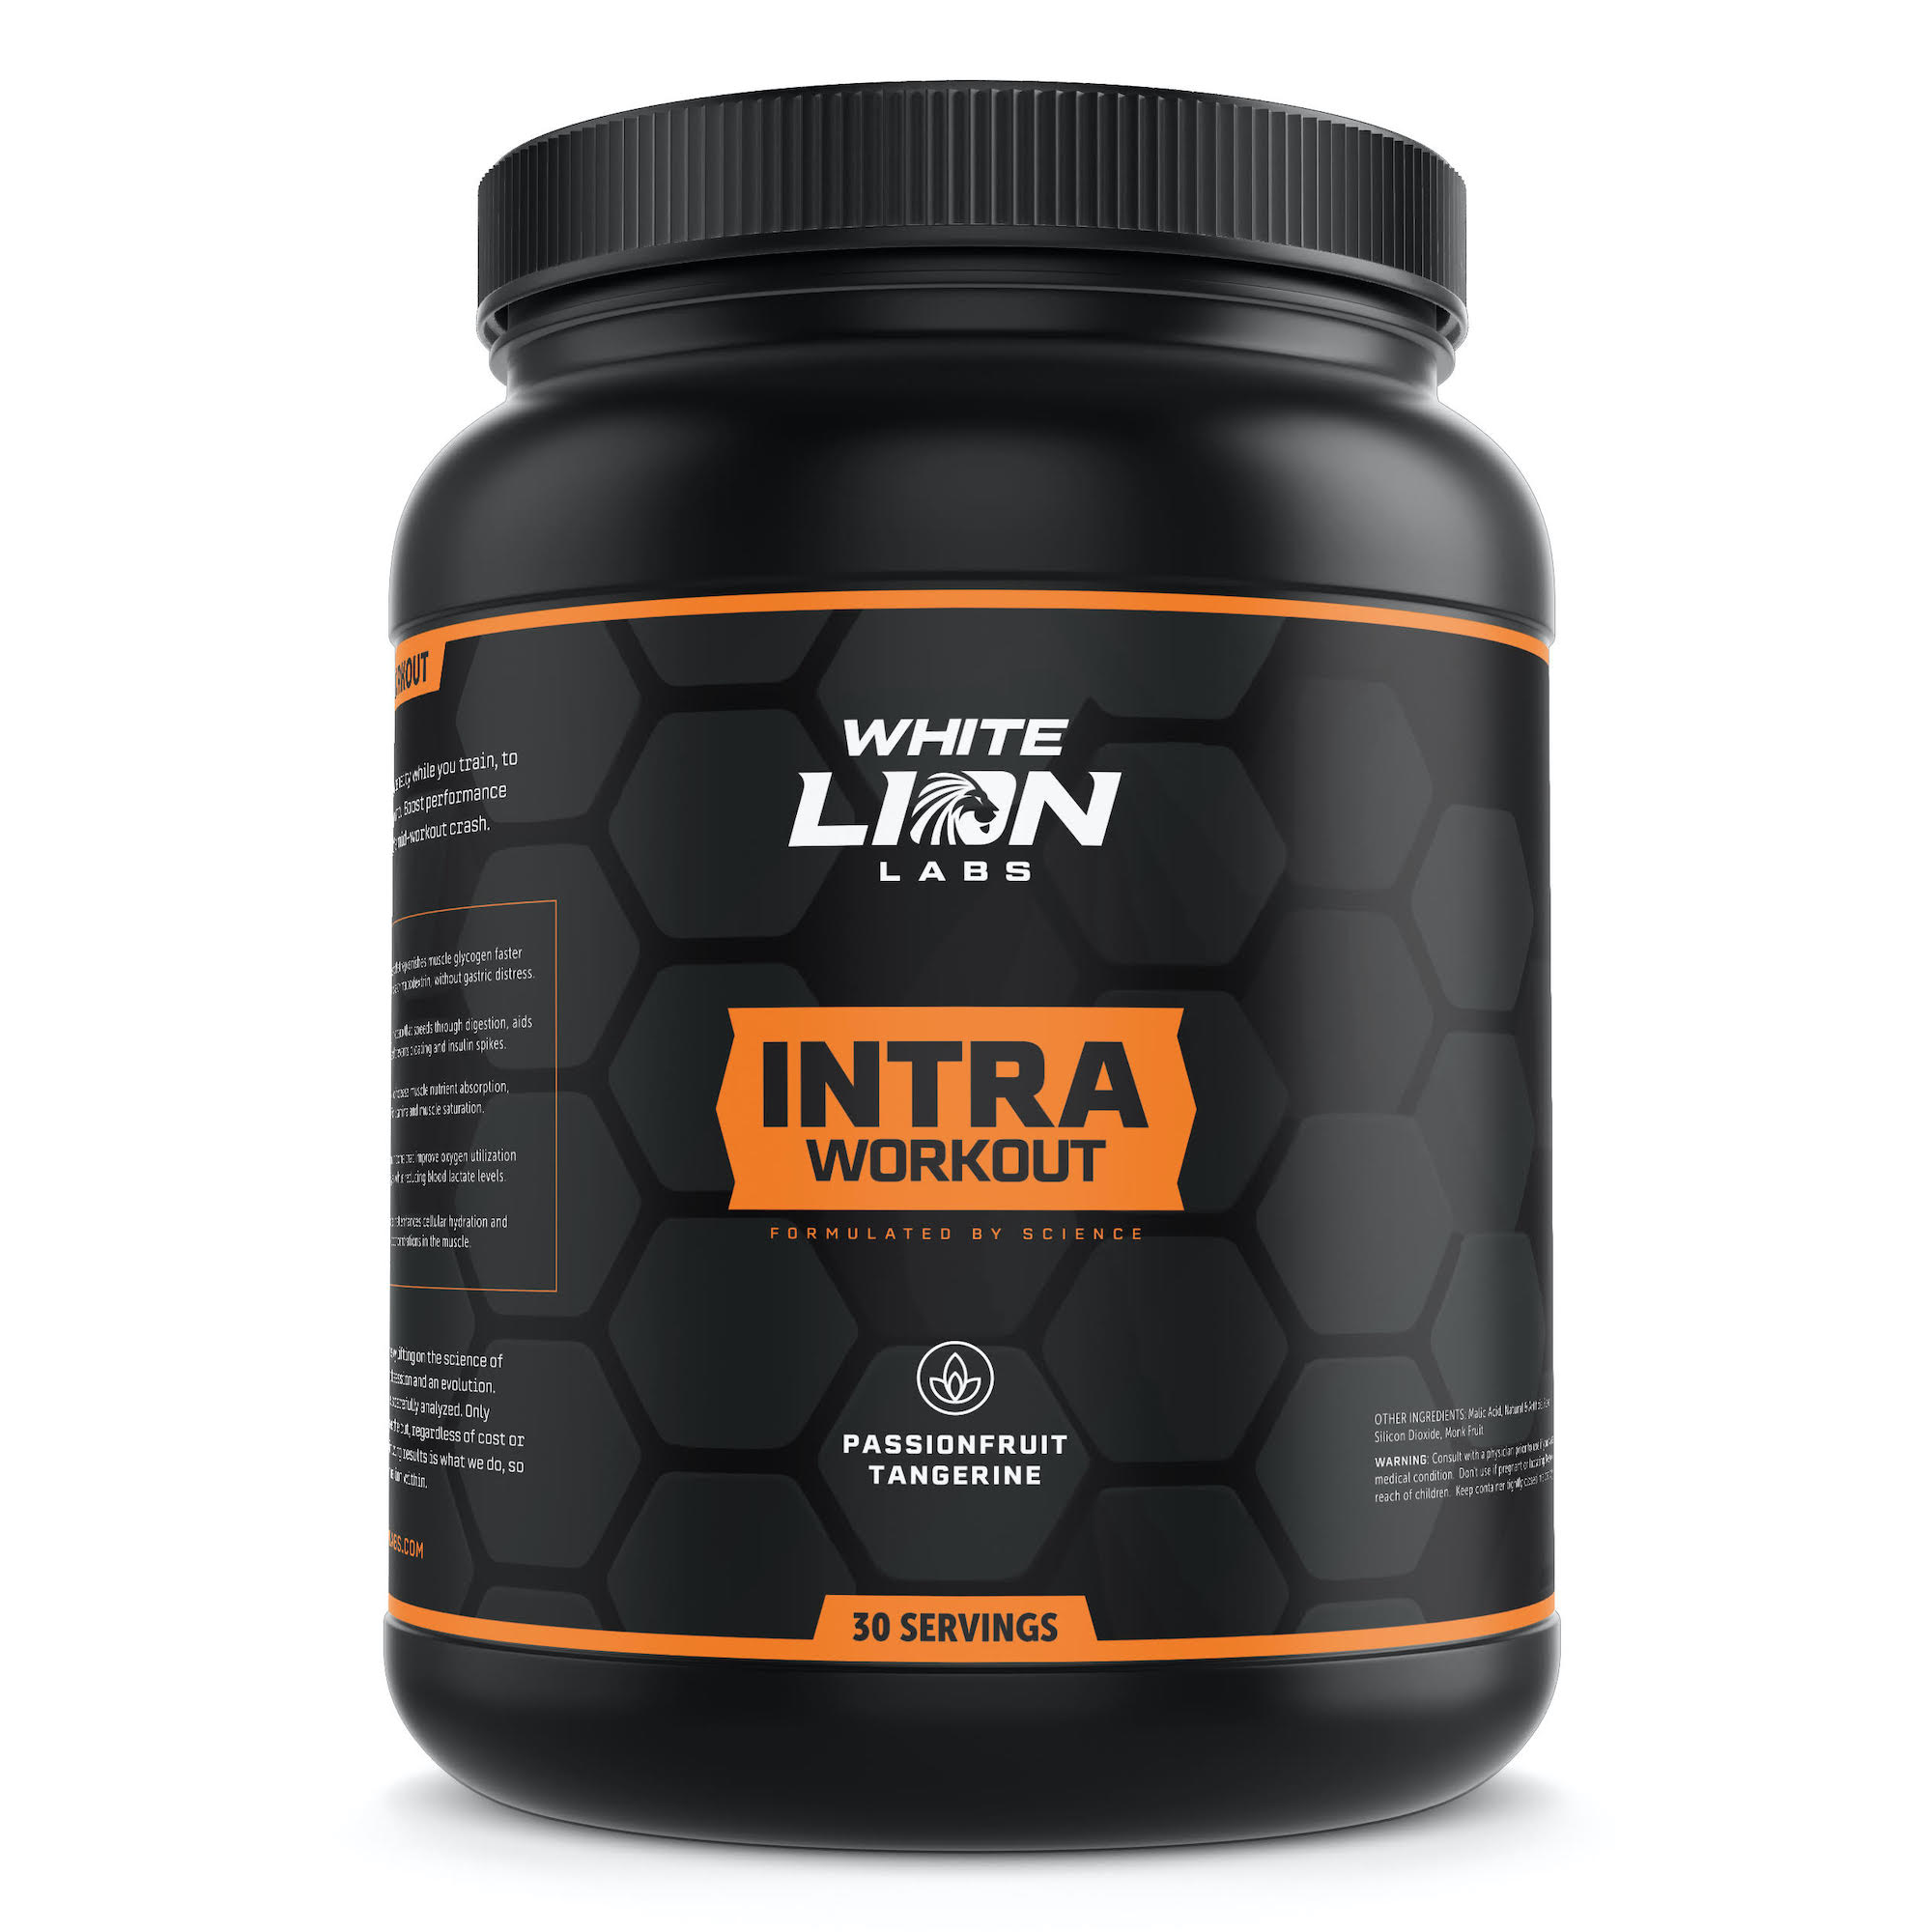 White Lion Labs INTRA workout packaging